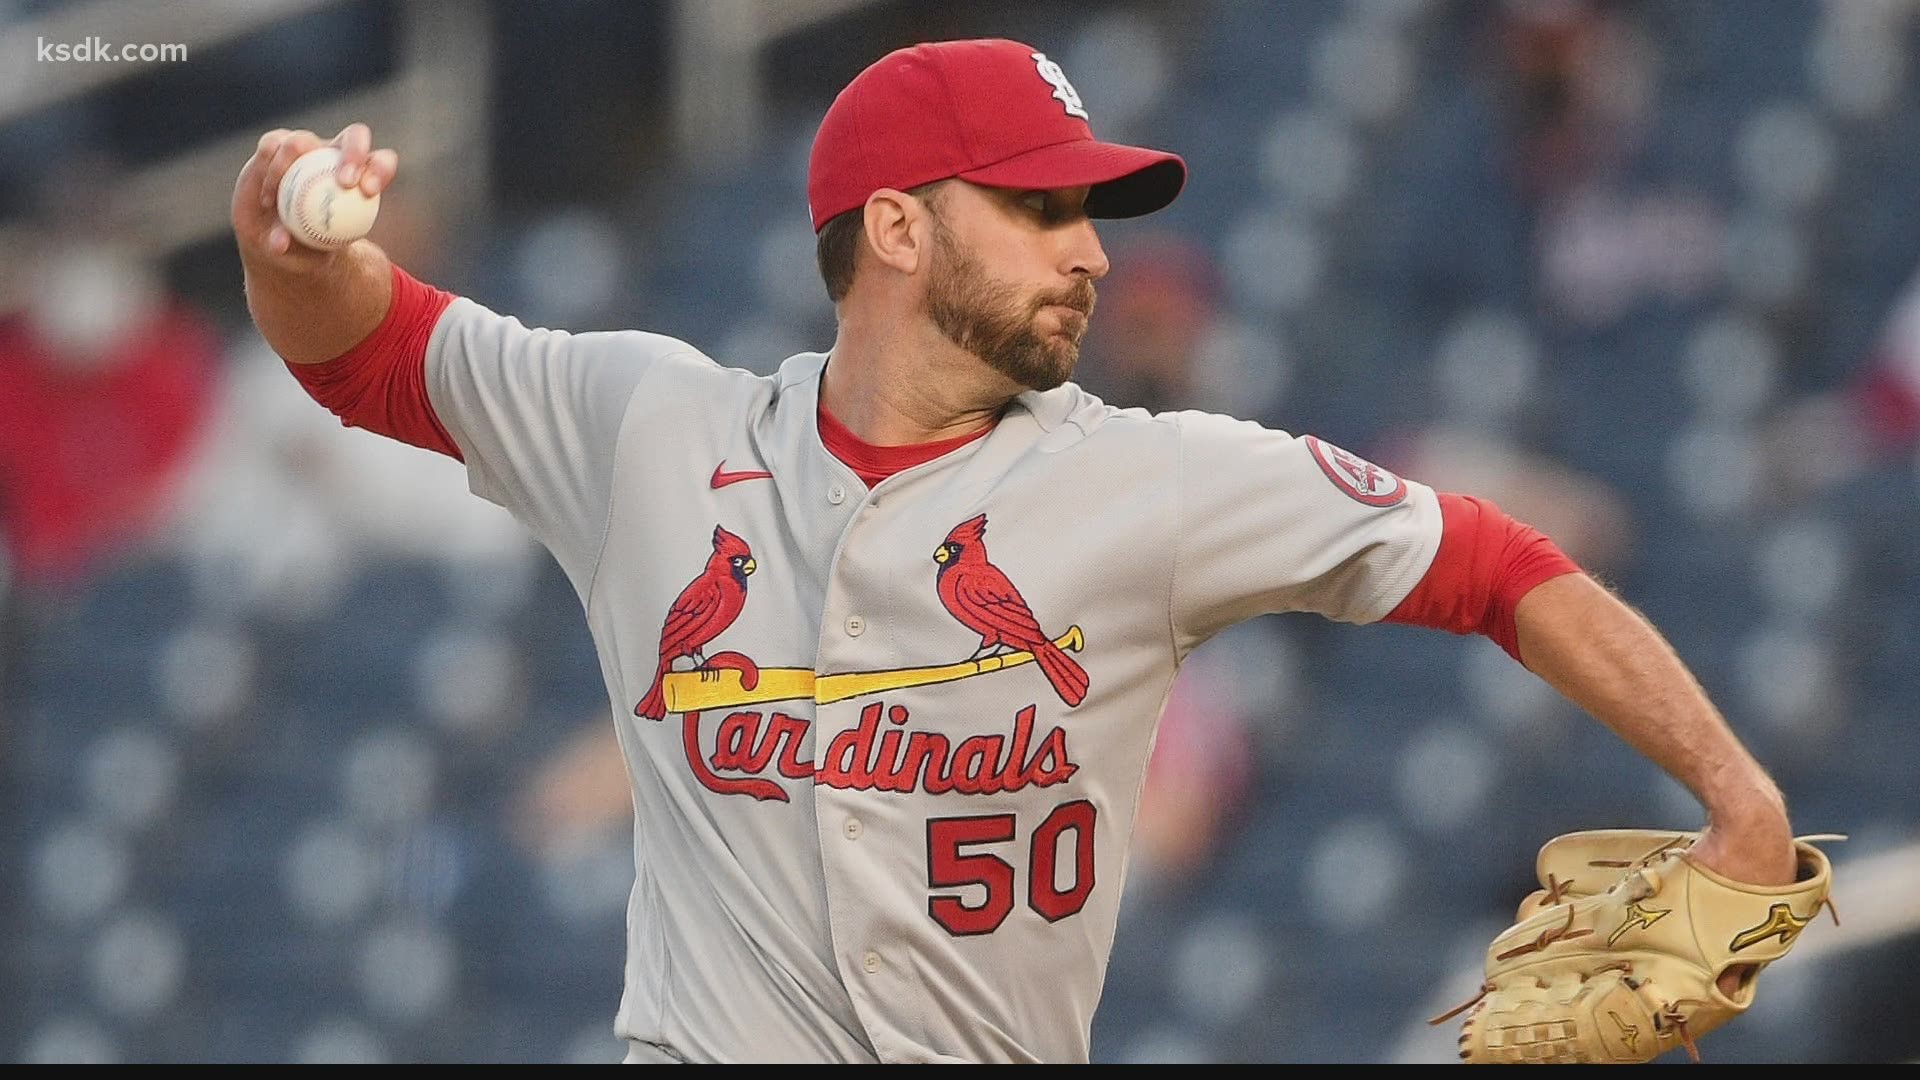 Wainwright was named in the story as a pitcher who sought out a sticky substance.